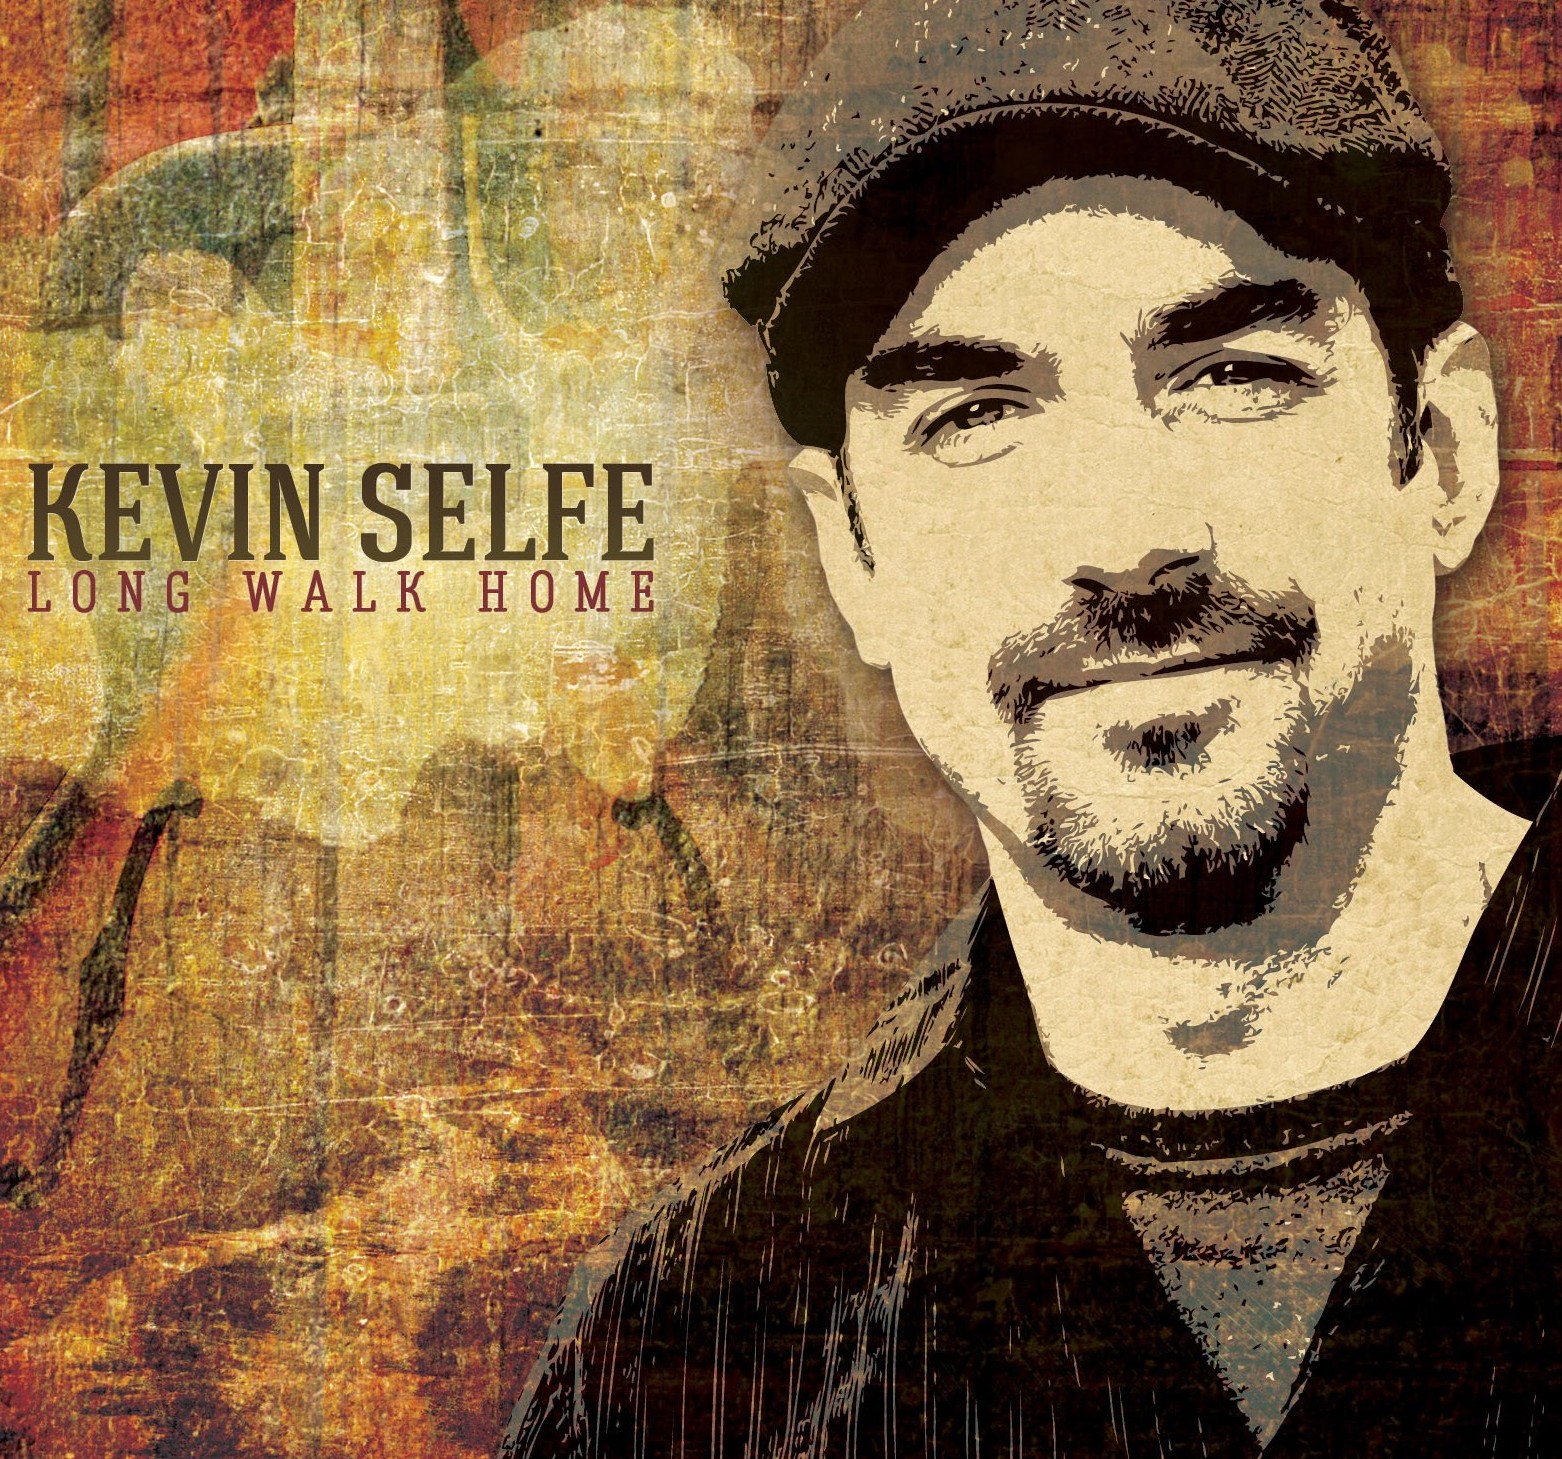 Kevin Selfe signs with Delta Groove!!!